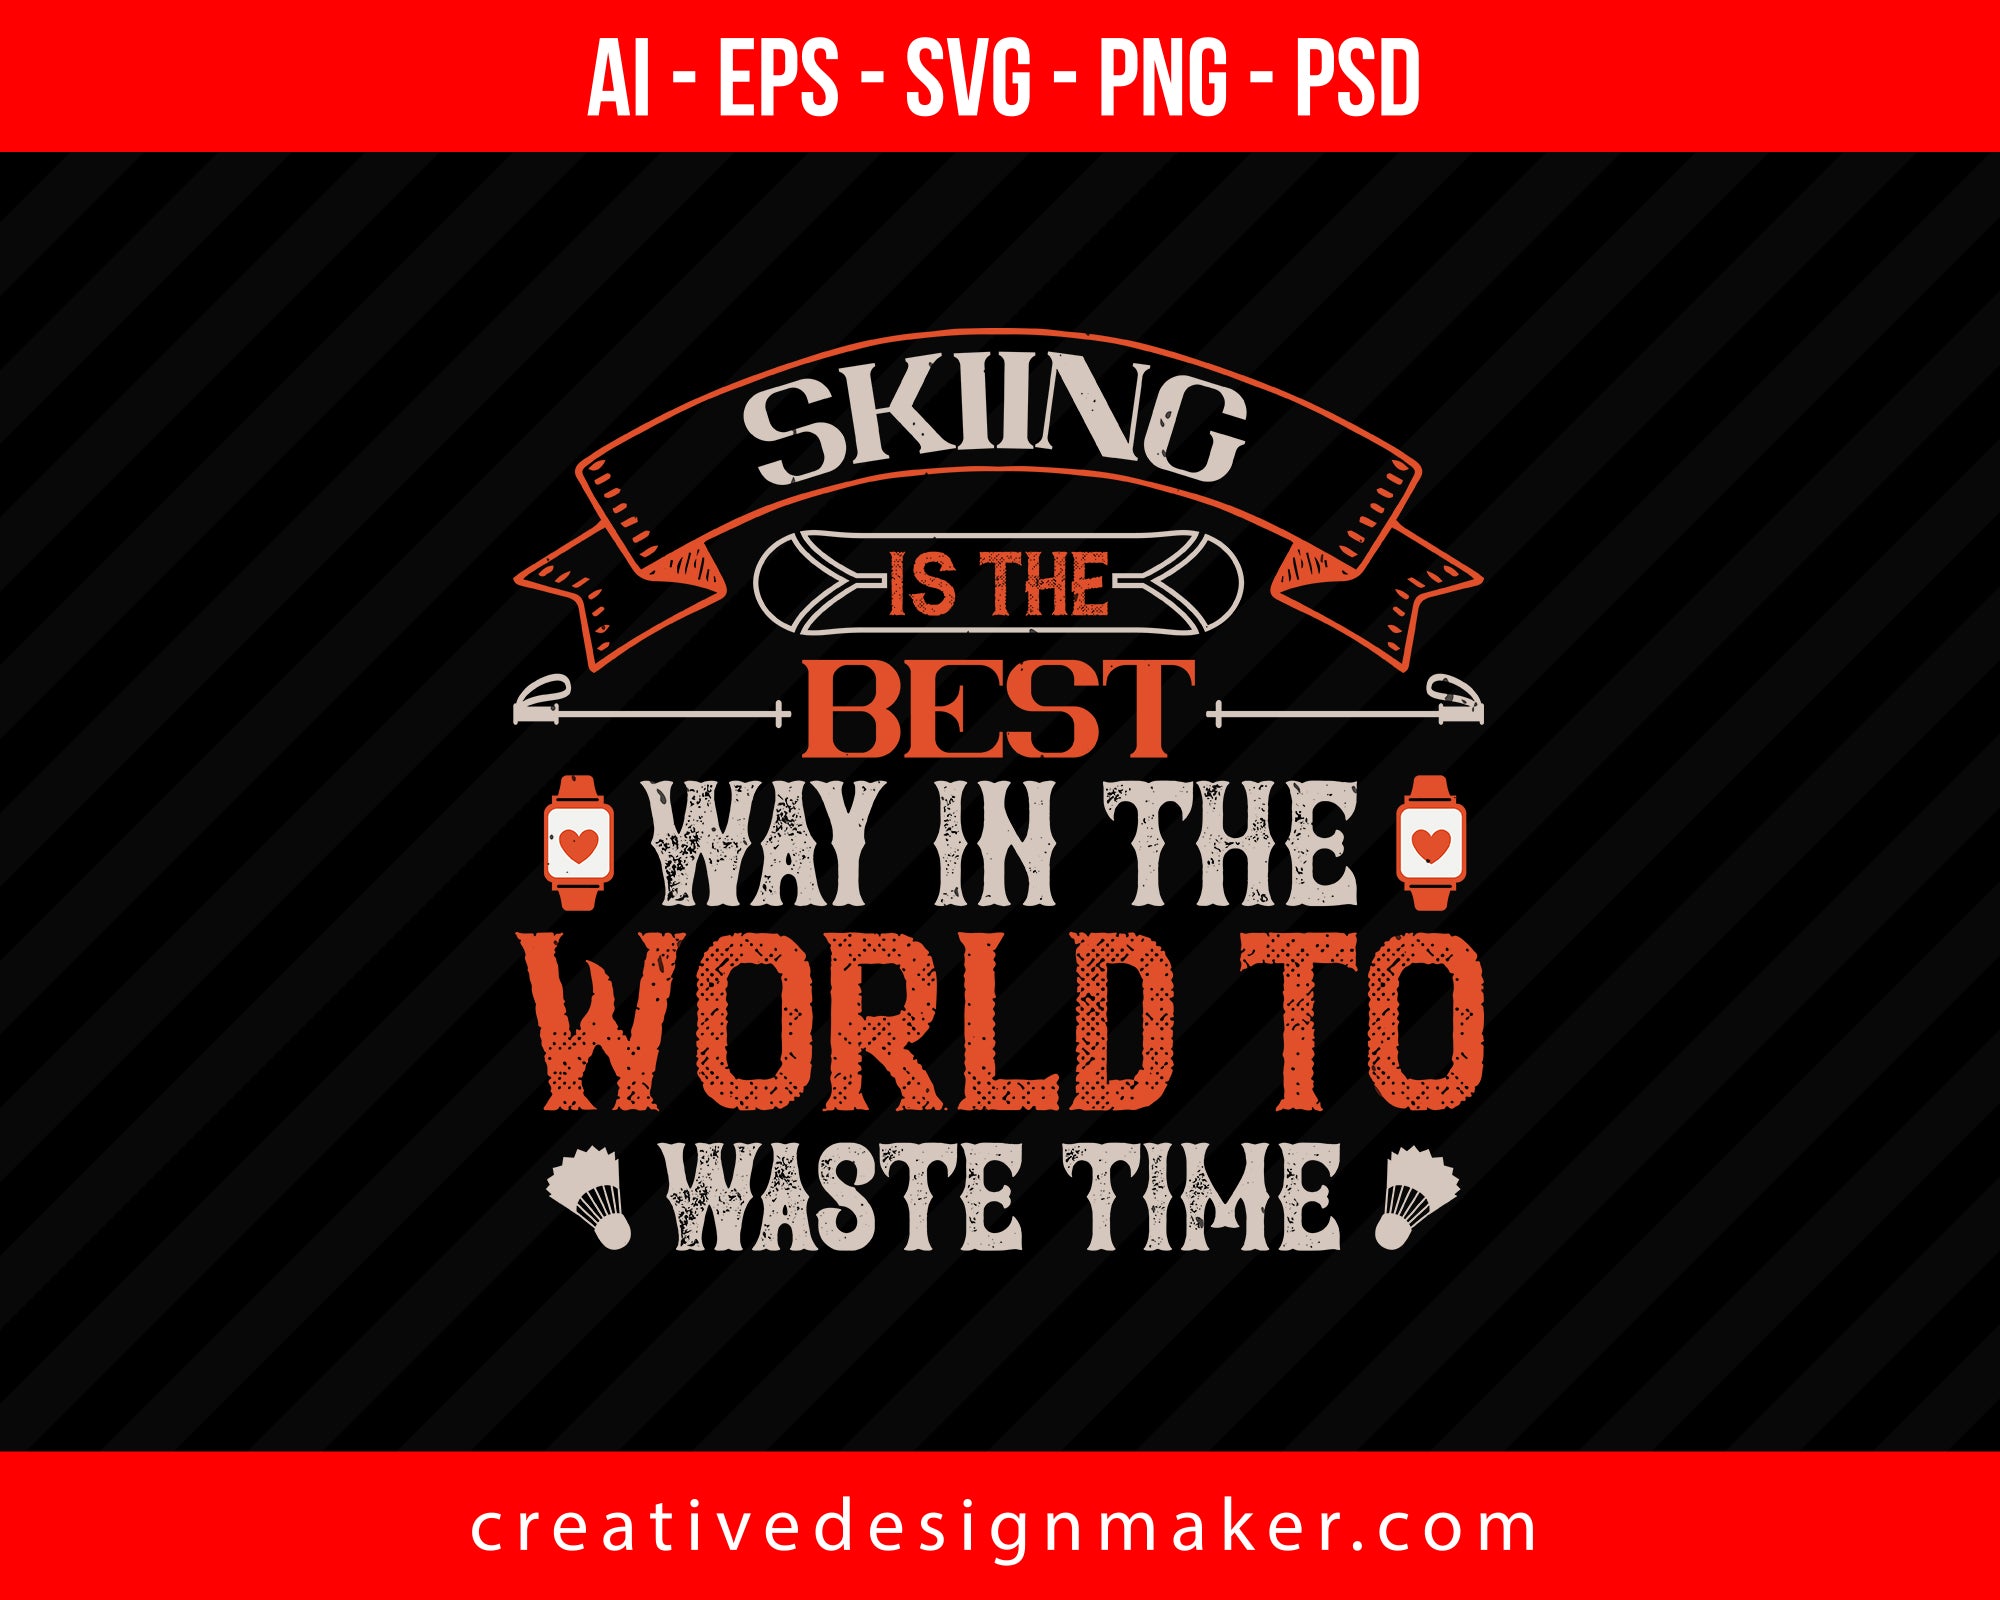 Skiing is the best way in the world to waste time Print Ready Editable T-Shirt SVG Design!